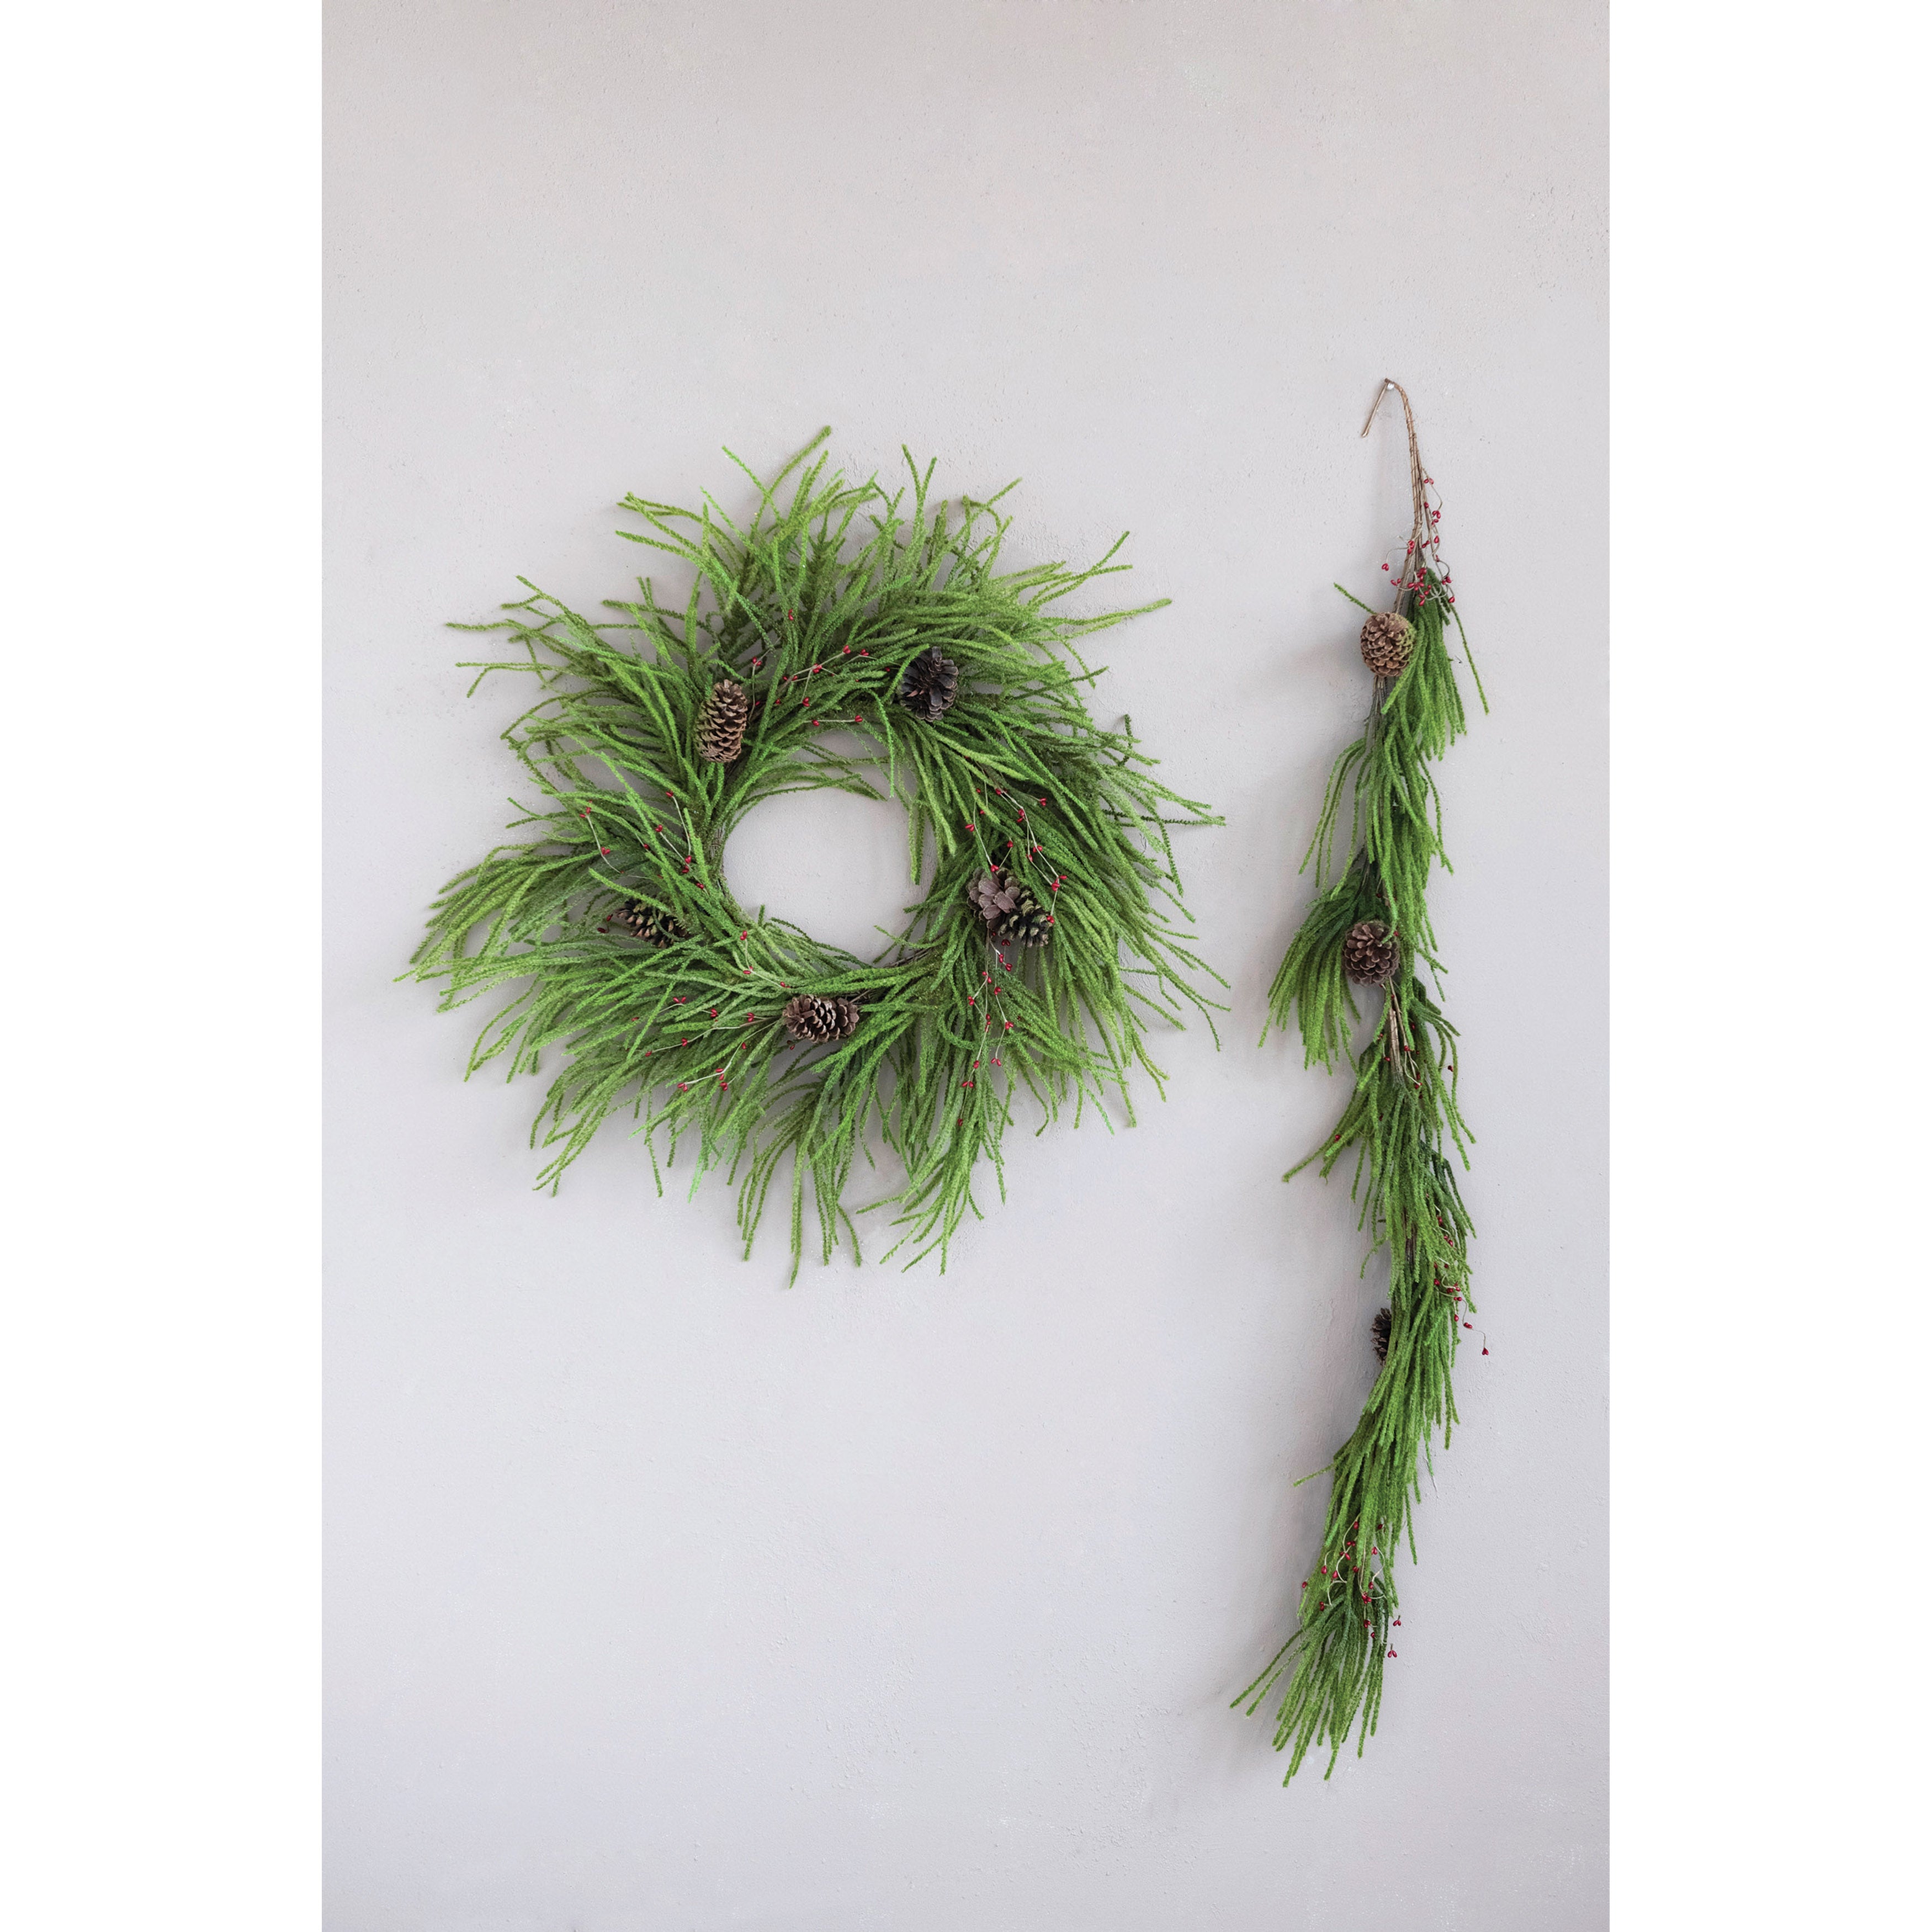 70"L Faux Norway Spruce Garland with Berries and Pinecones